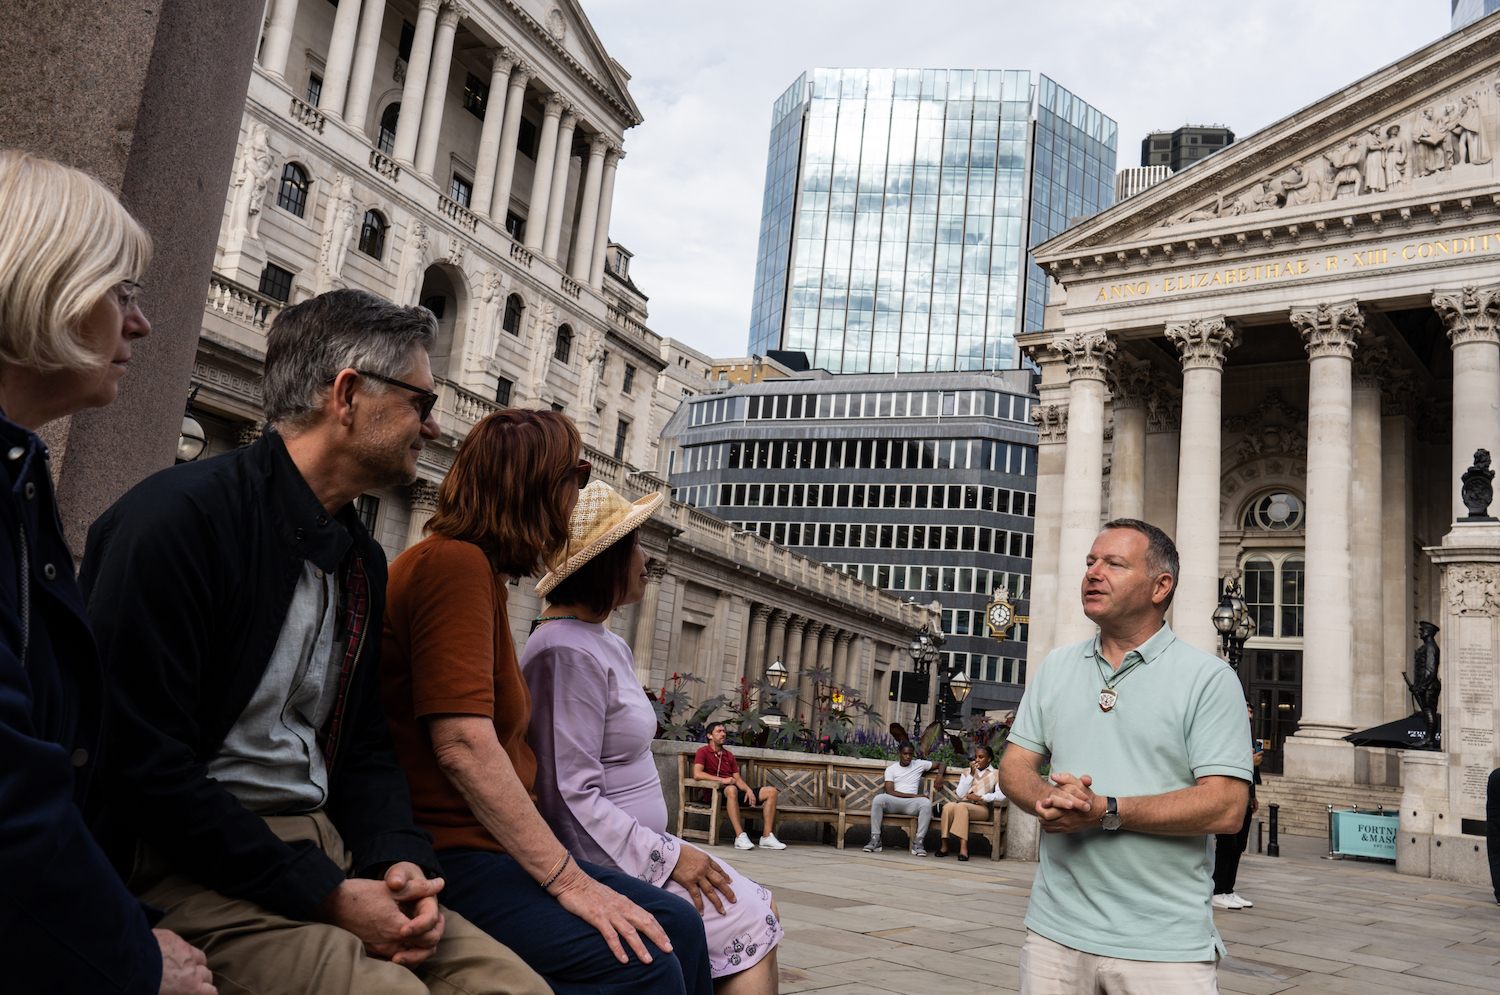 City of London Guides – Daily Guided Walks